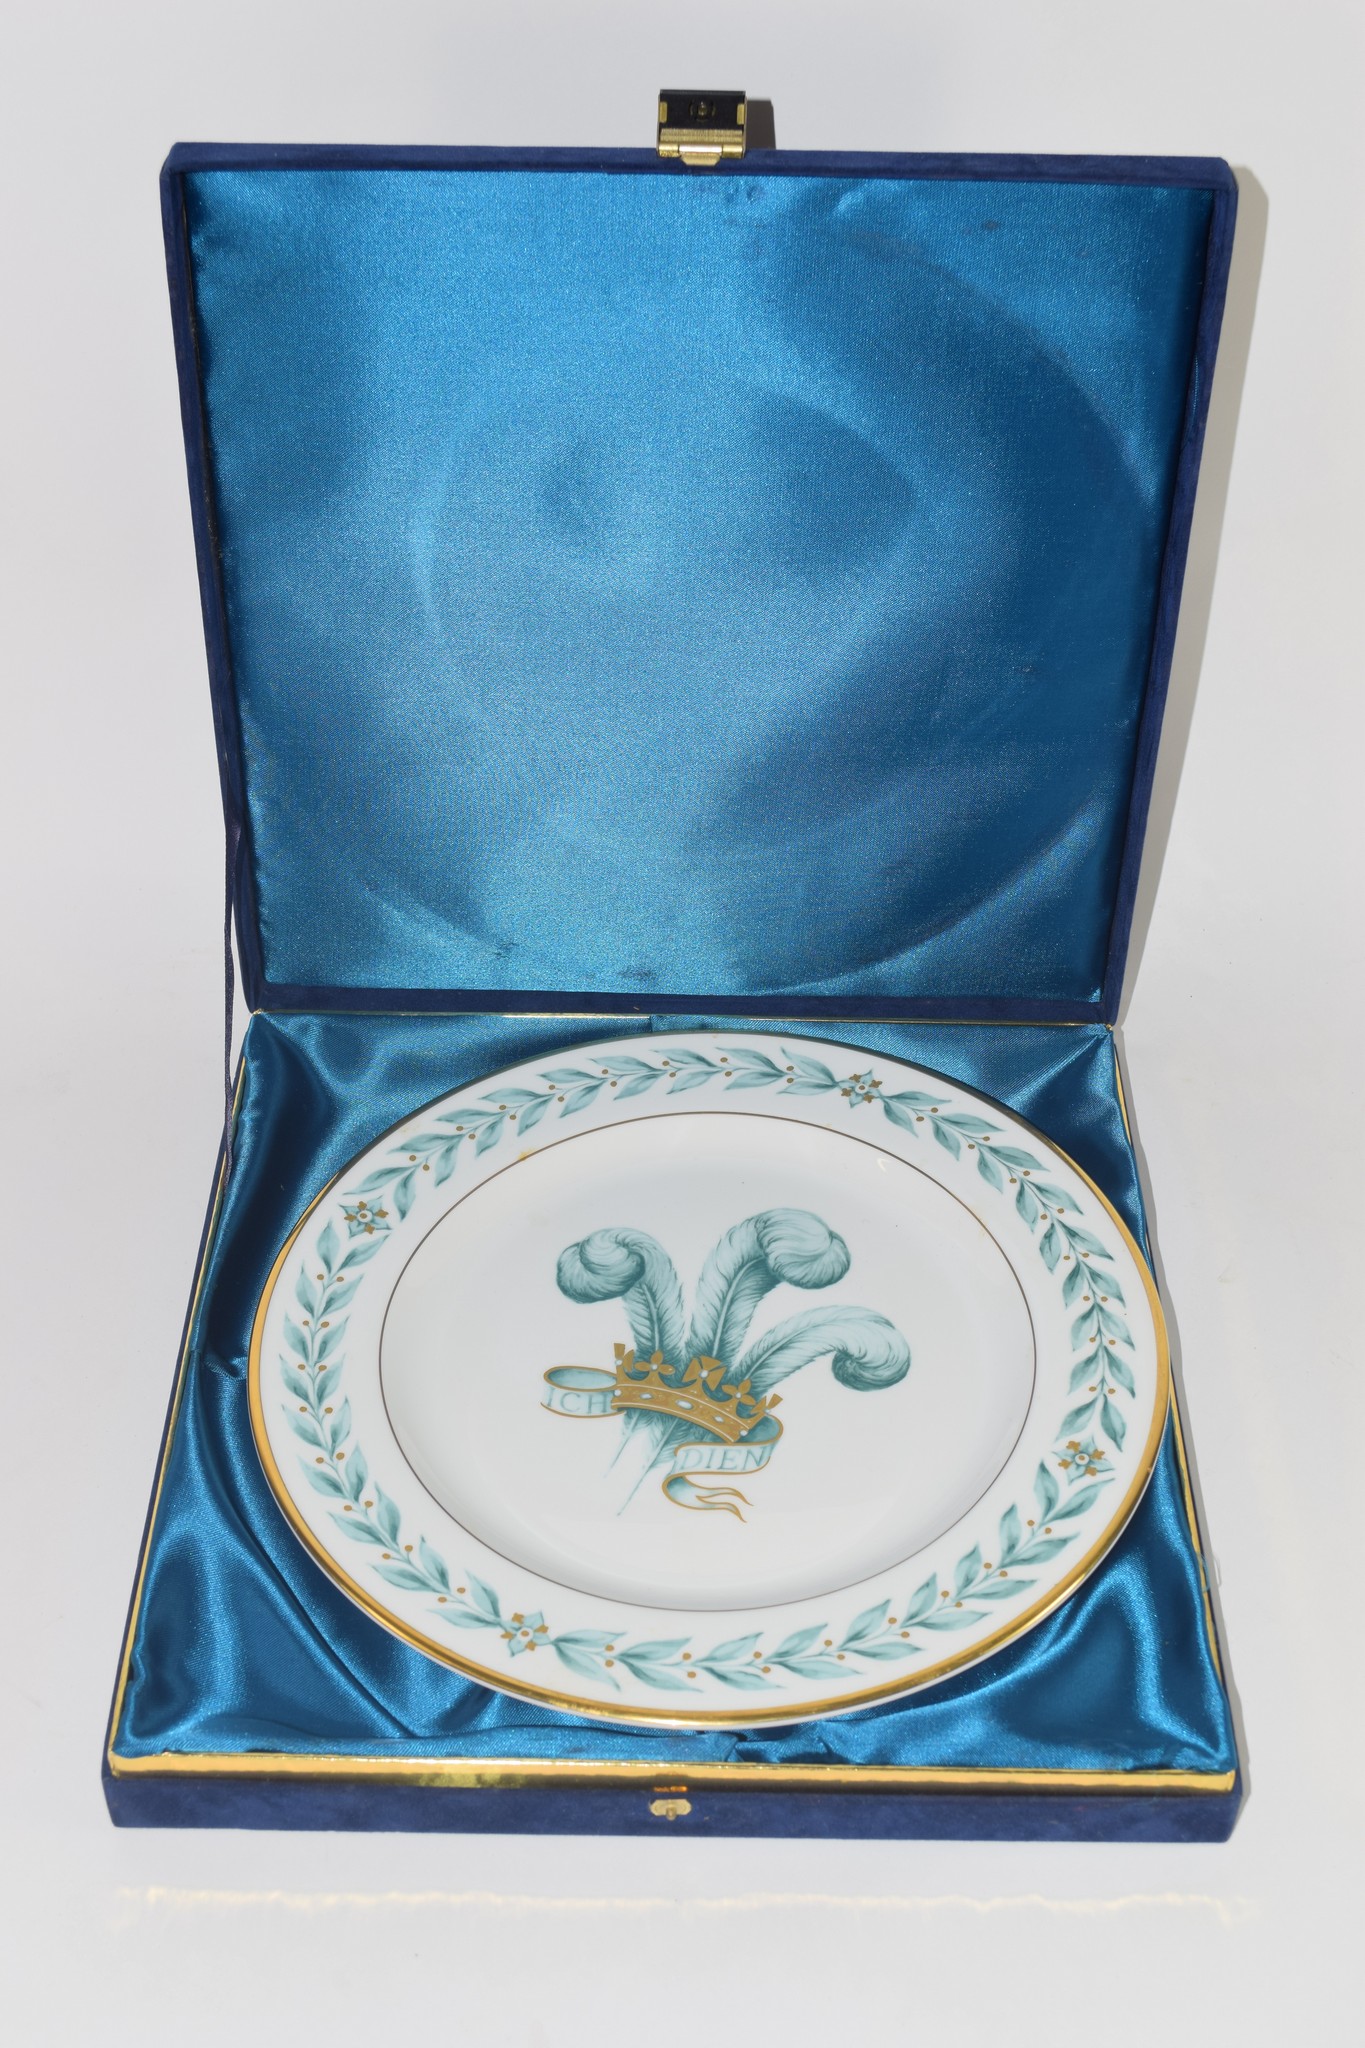 CASED PLATE WITH PRINCE OF WALES FEATHERS MADE BY ROYAL DOULTON, THE REVERSE WITH INSCRIPTION "